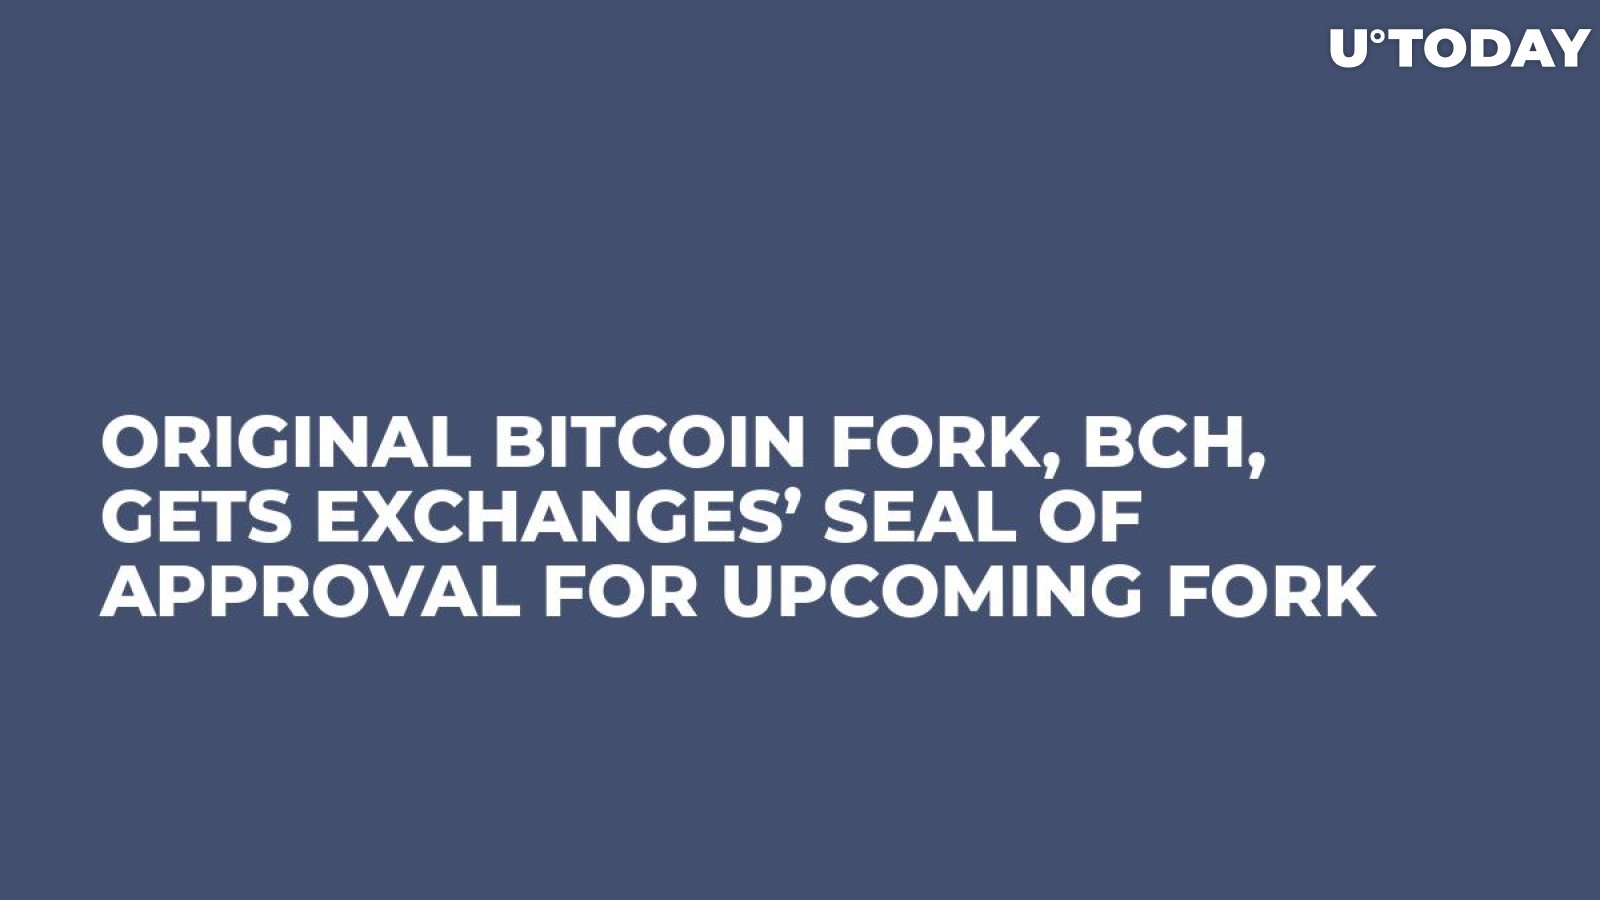 Original Bitcoin Fork, BCH, Gets Exchanges’ Seal of Approval for Upcoming Fork